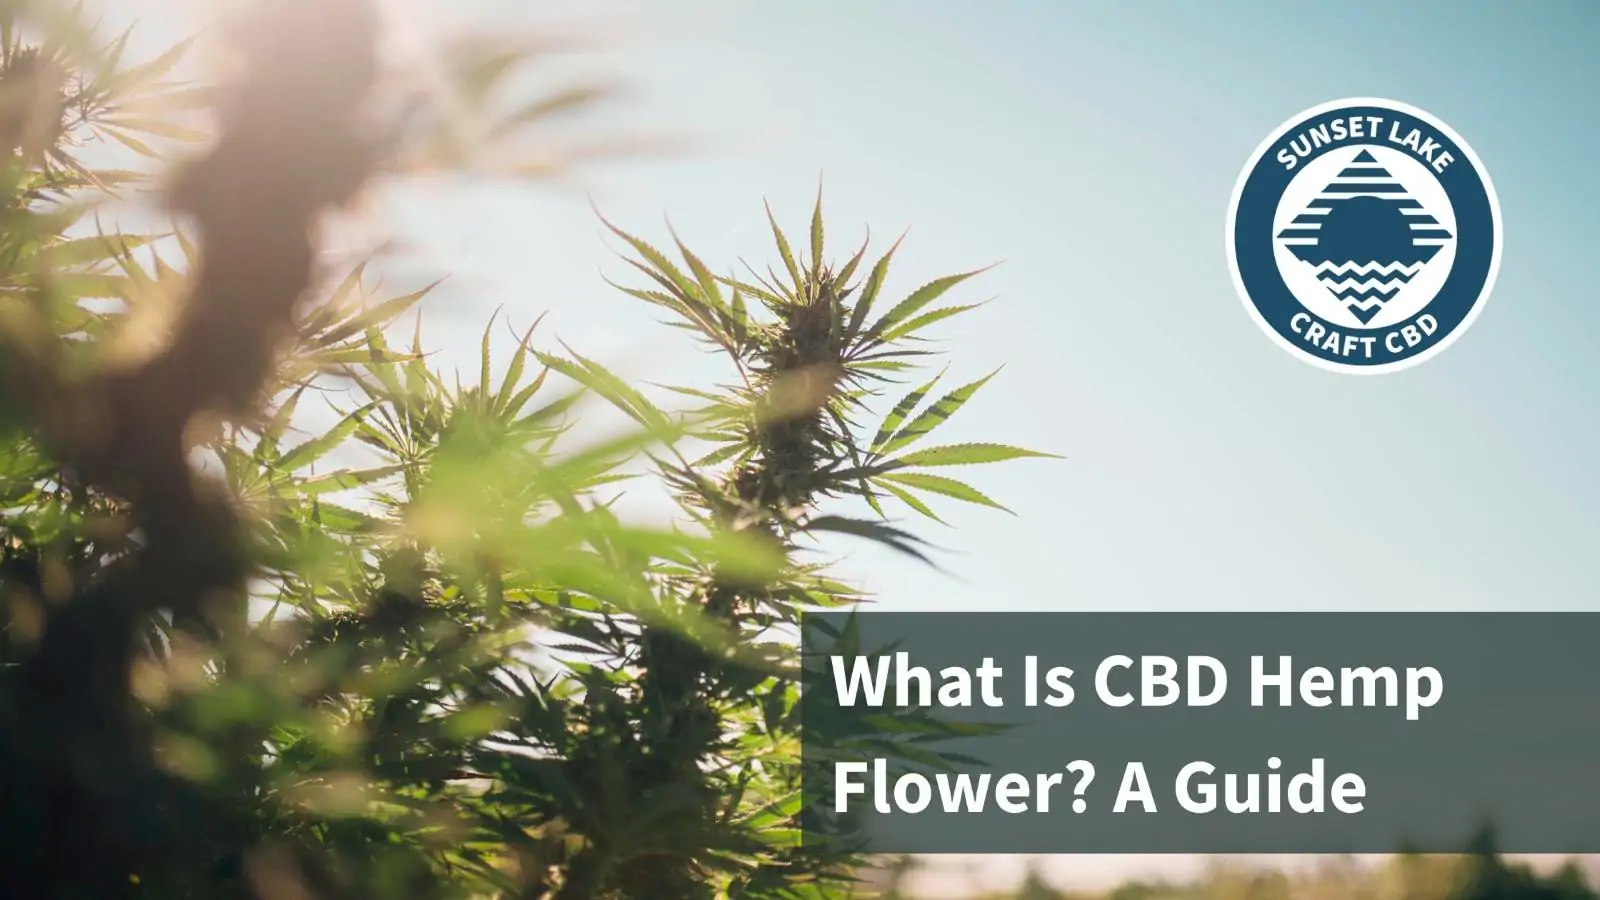 What Is CBD Hemp Flower? Our Guide To CBD-Rich Flower